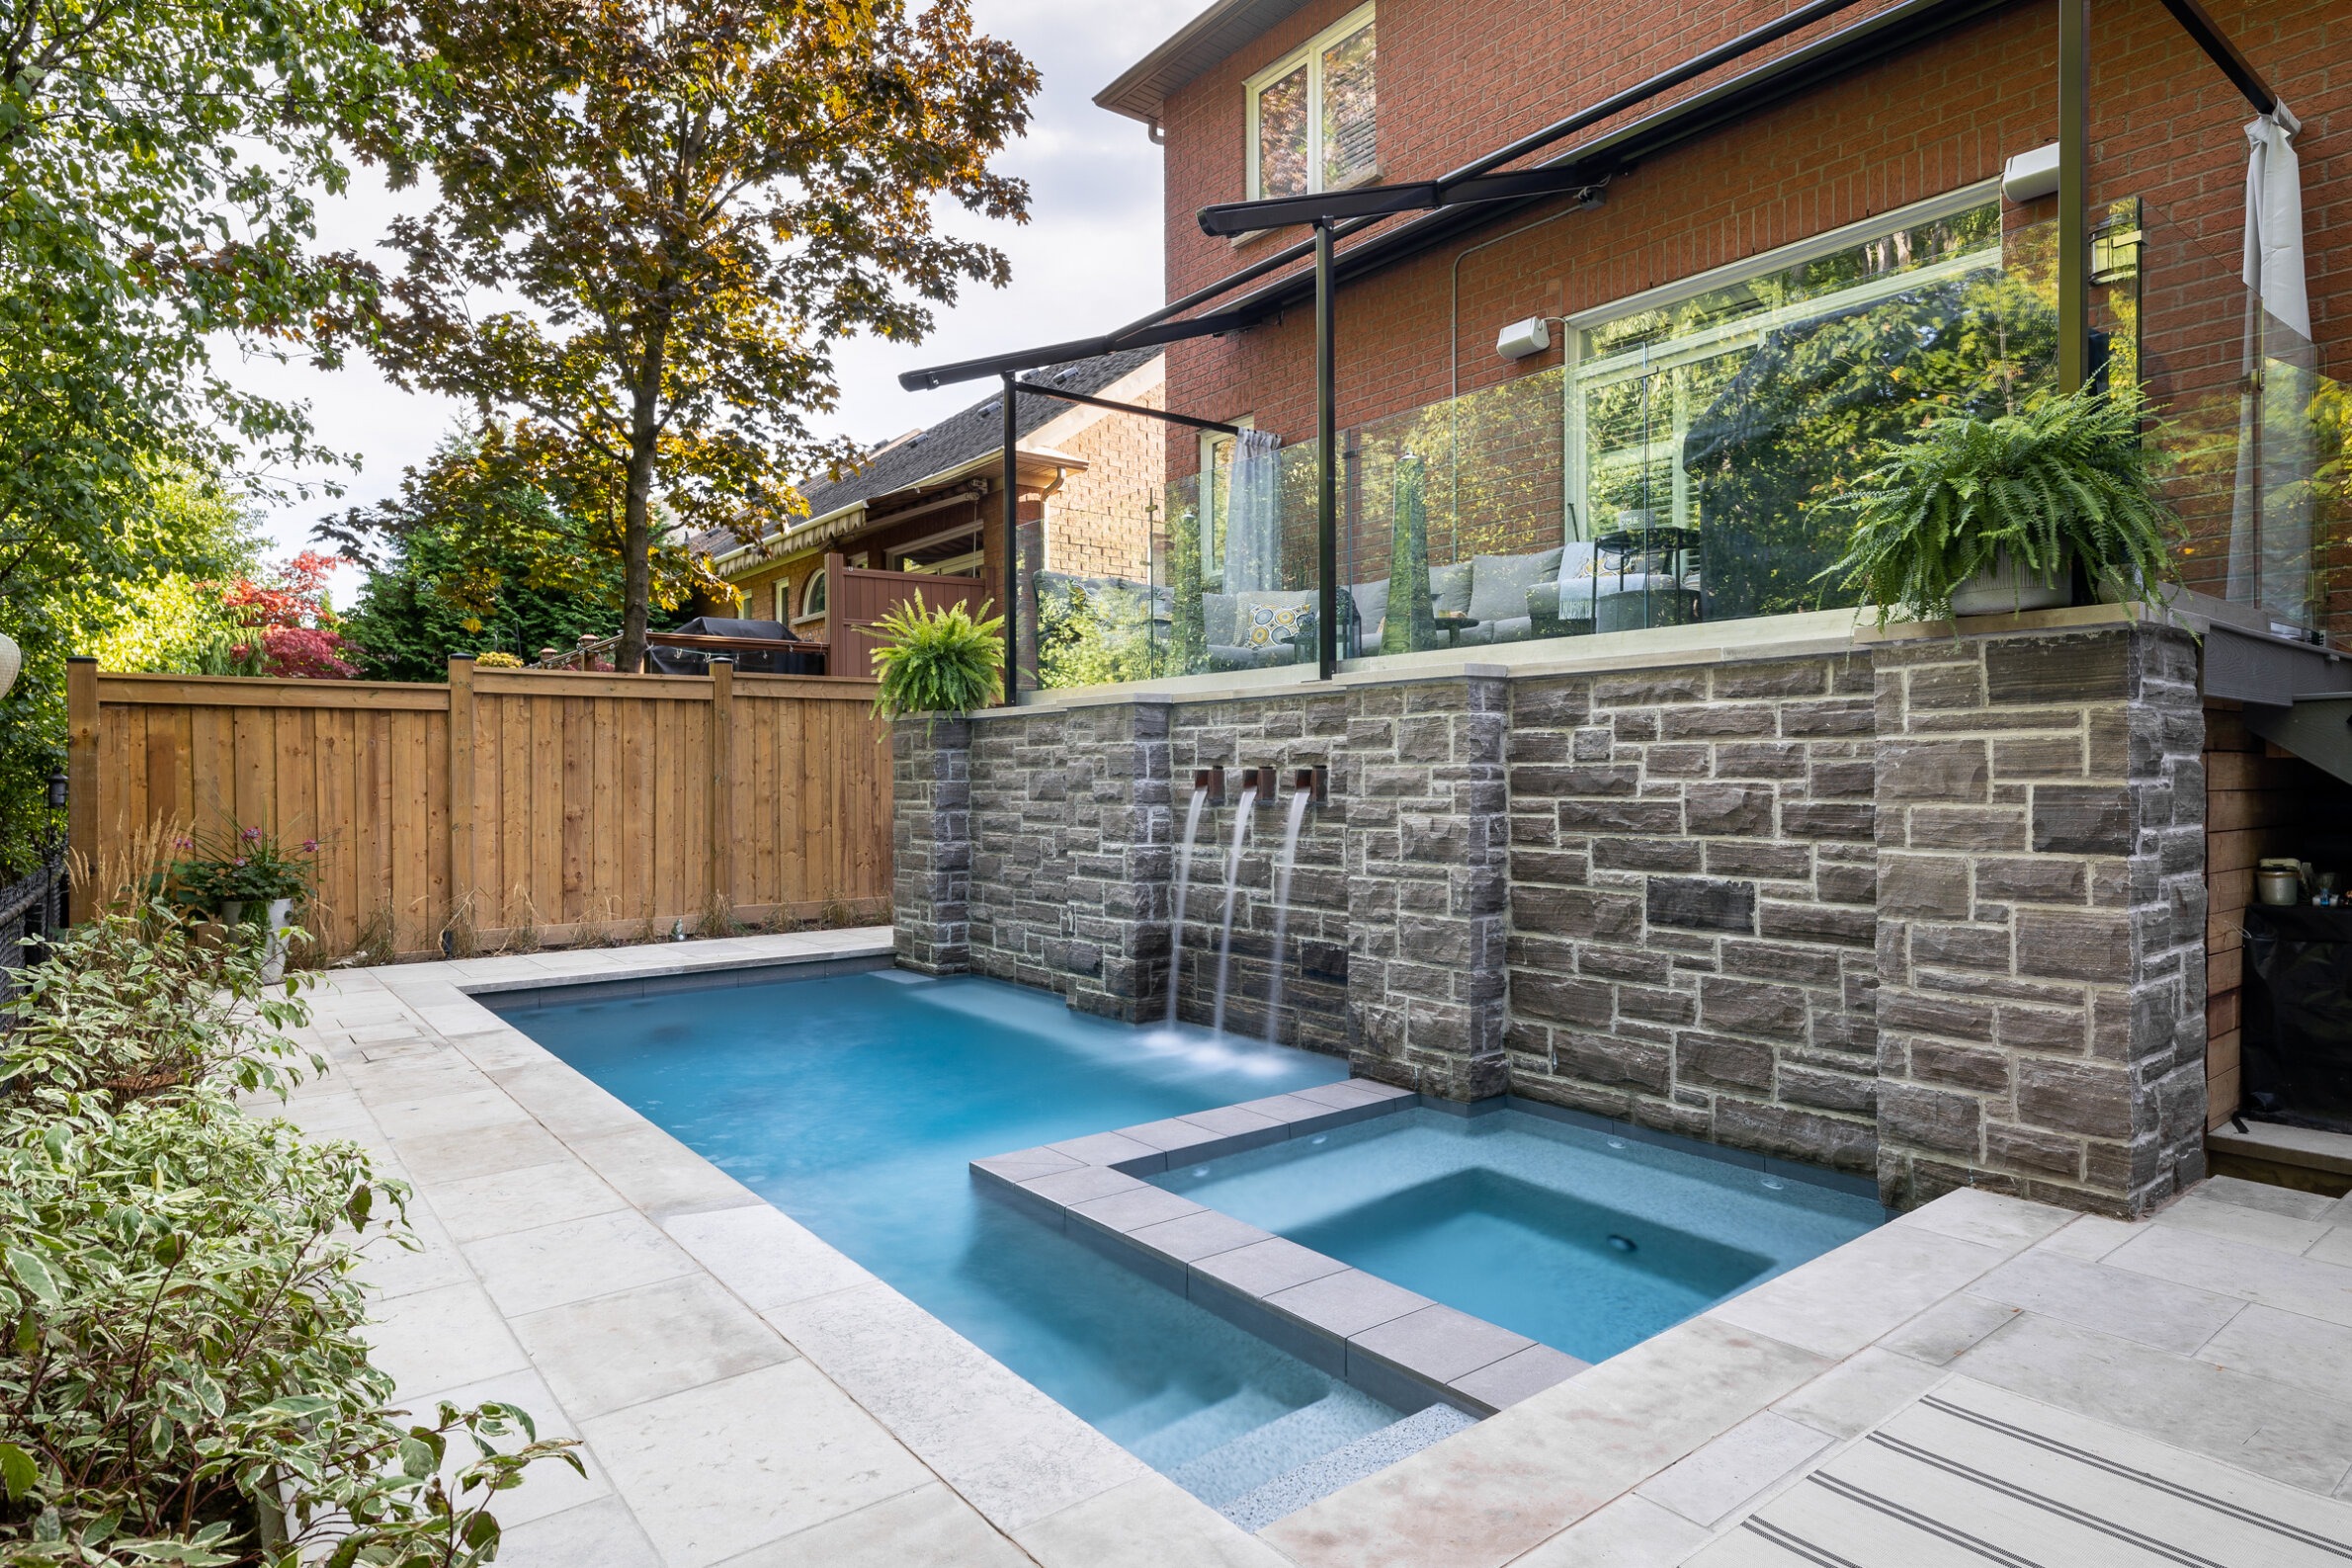 Backyard with a modern swimming pool featuring a stone wall with water features, surrounded by wooden fencing, landscaping, and part of a brick house.